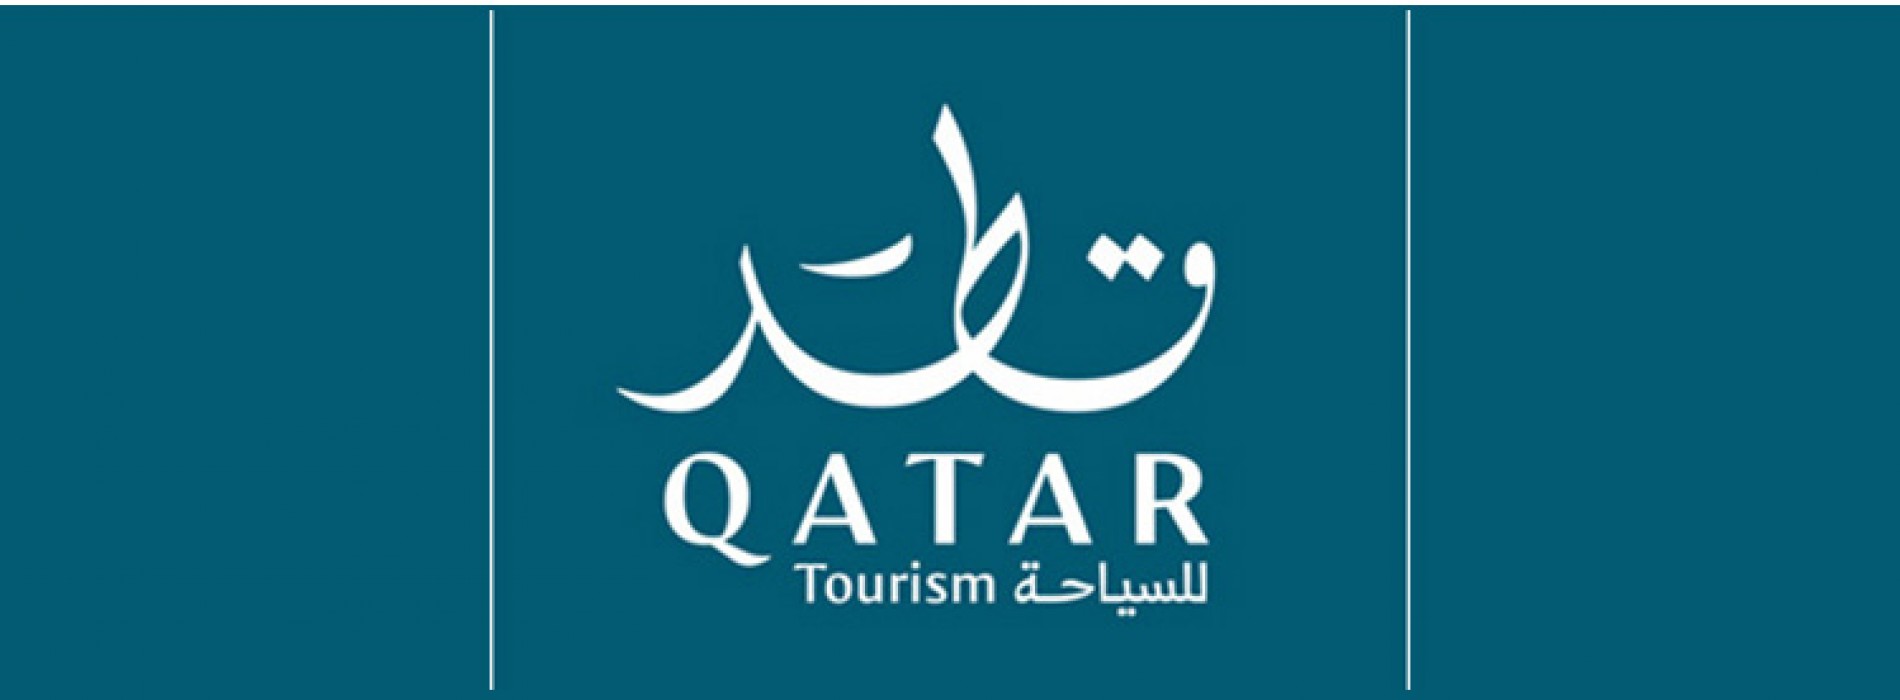 Five major tourism developments opening in Qatar before the FIFA World Cup 2022™